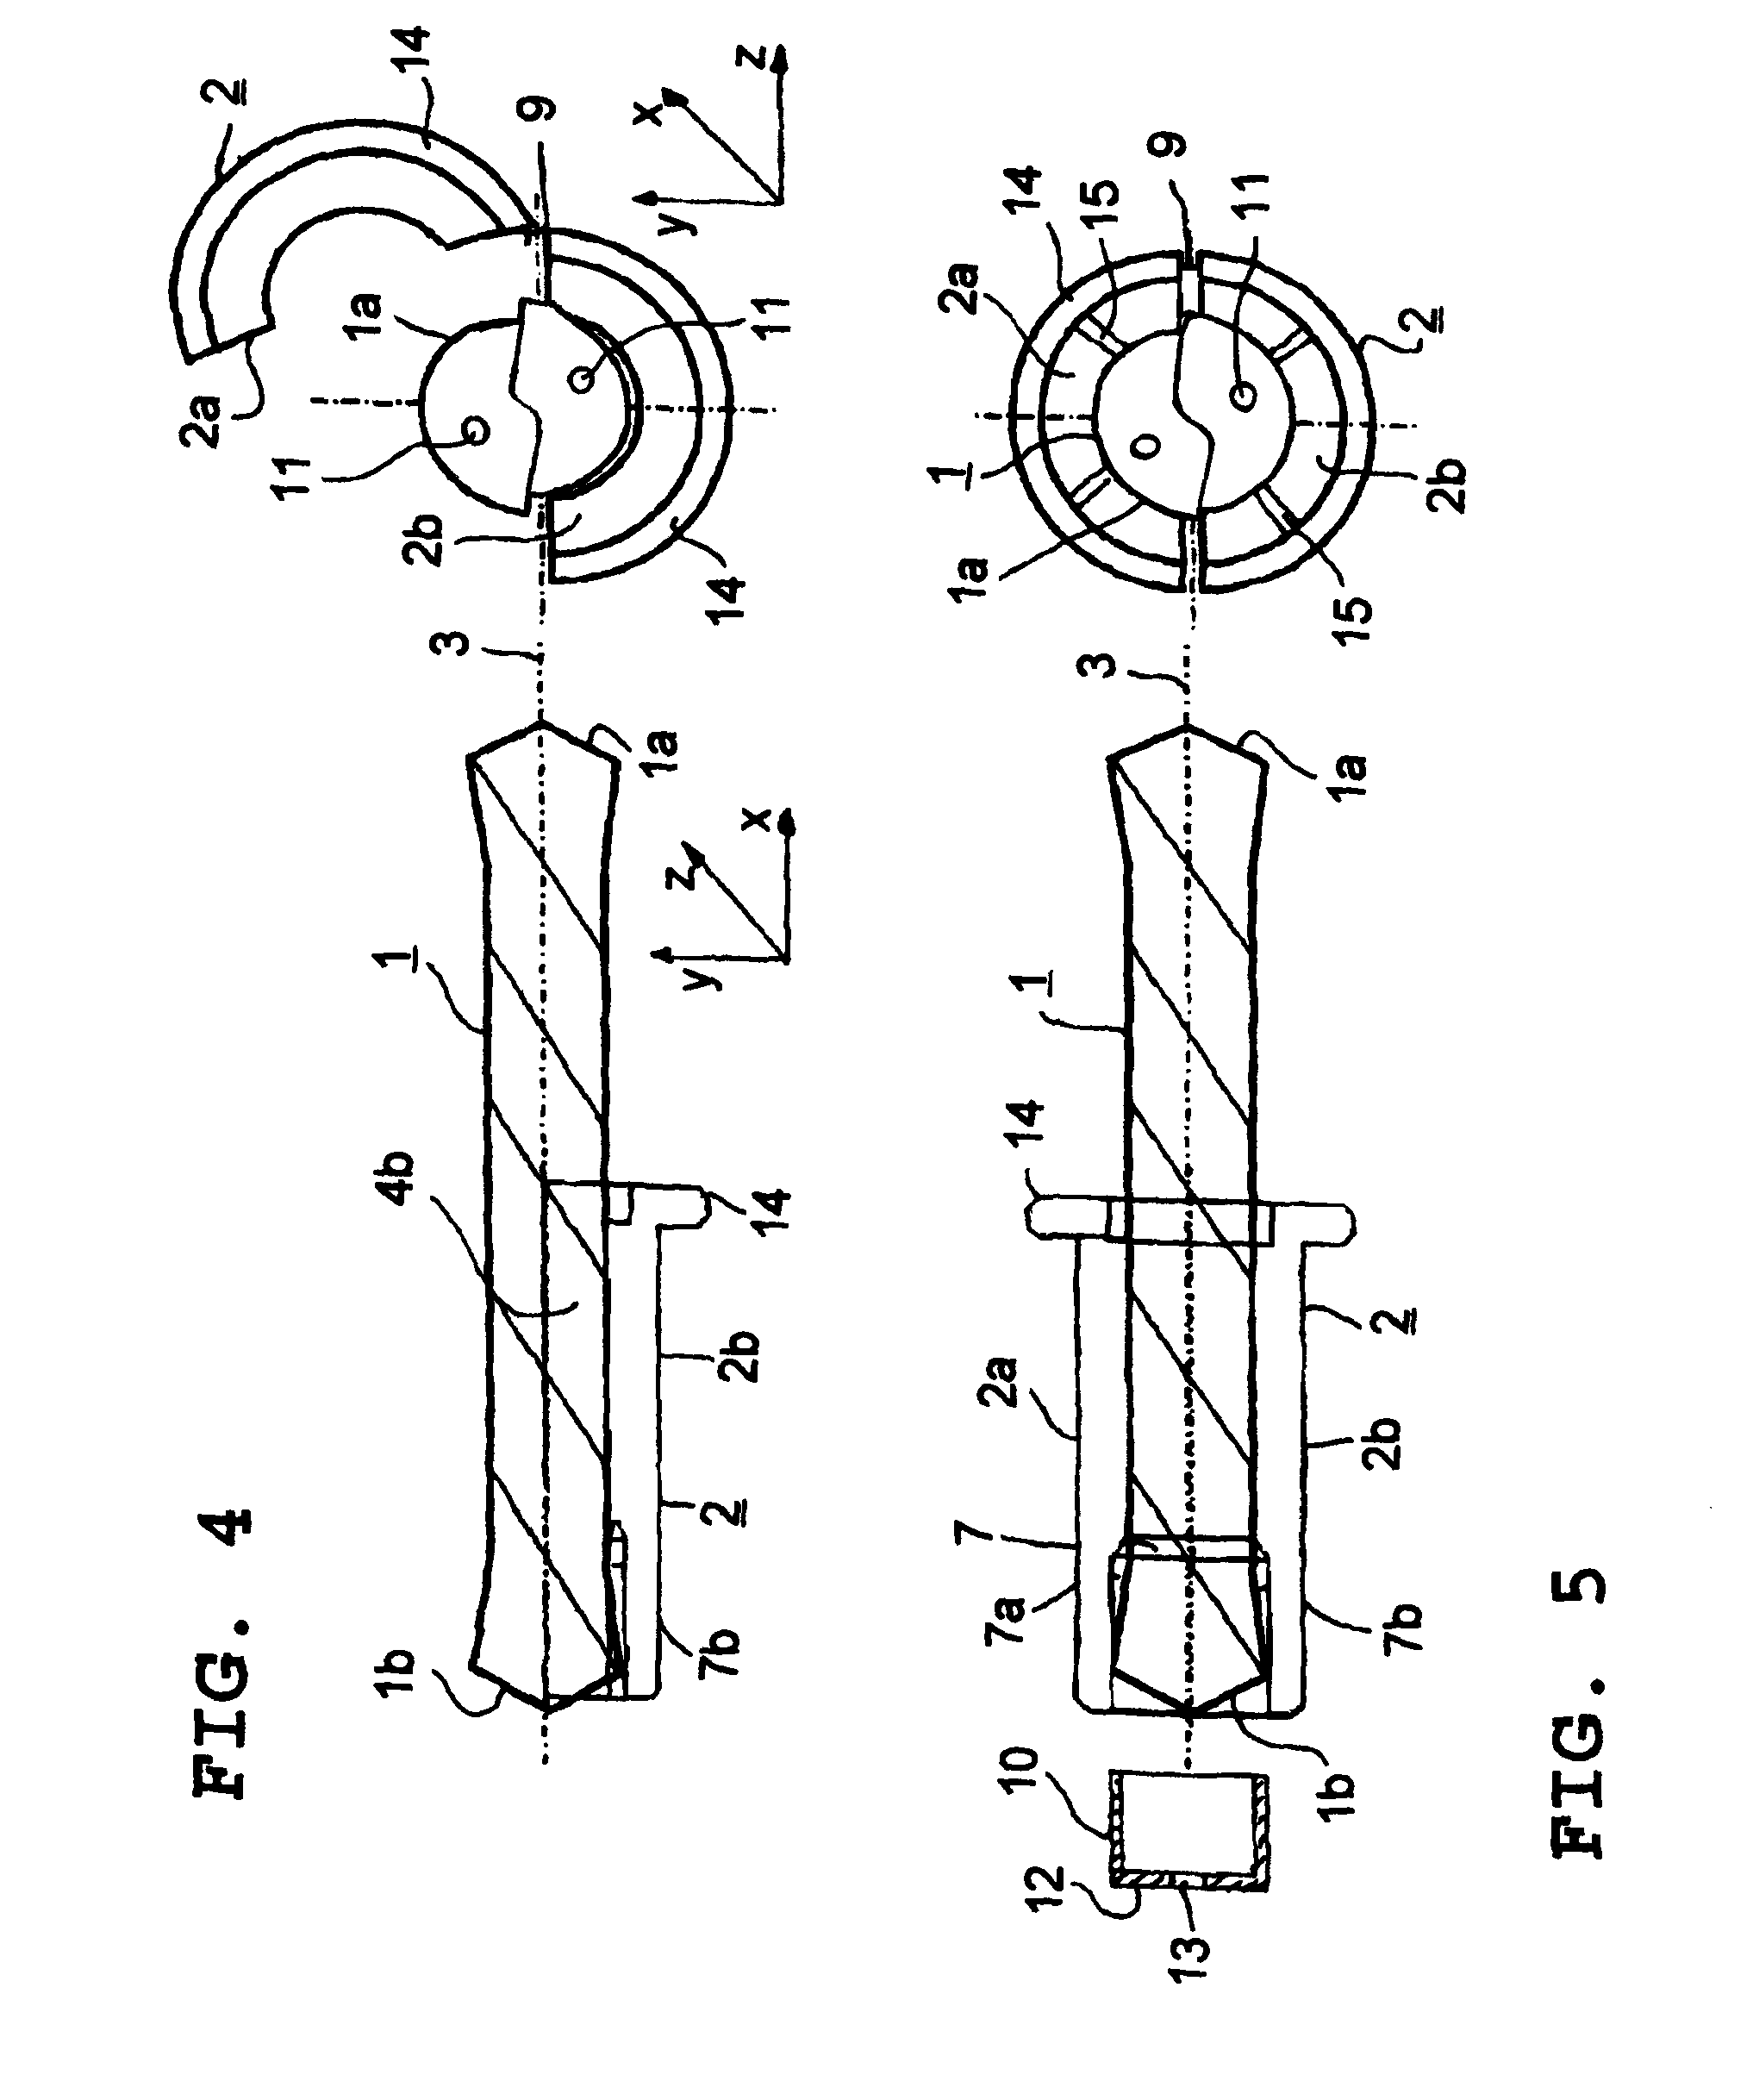 Combination of the chucking device and a drill and a chucking device for a drill with cutting tips on both ends